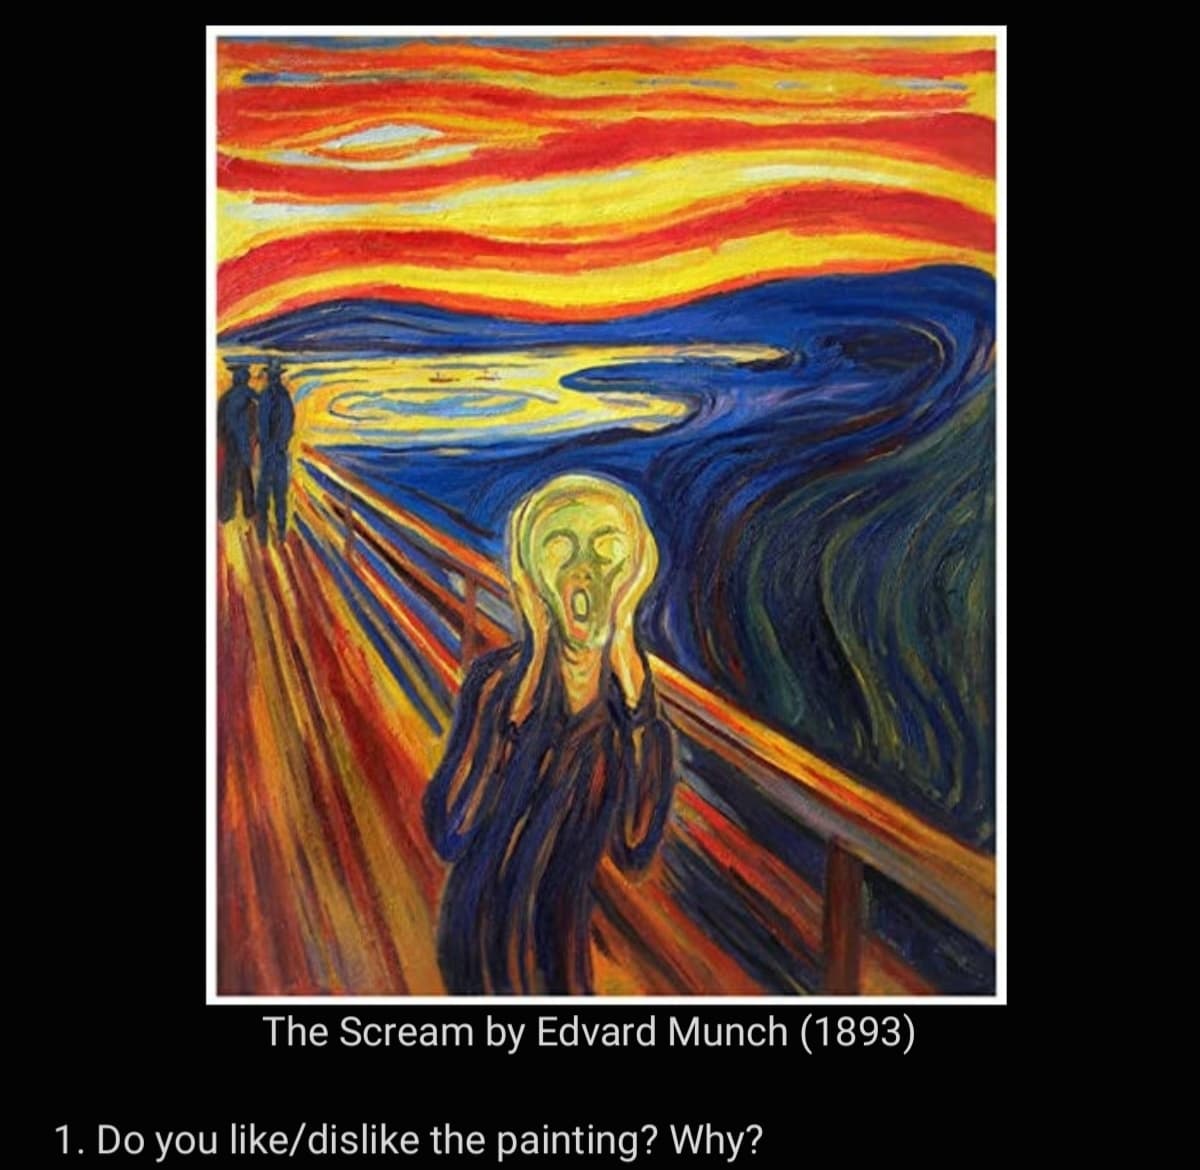 The Scream by Edvard Munch (1893)
1. Do you like/dislike the painting? Why?
